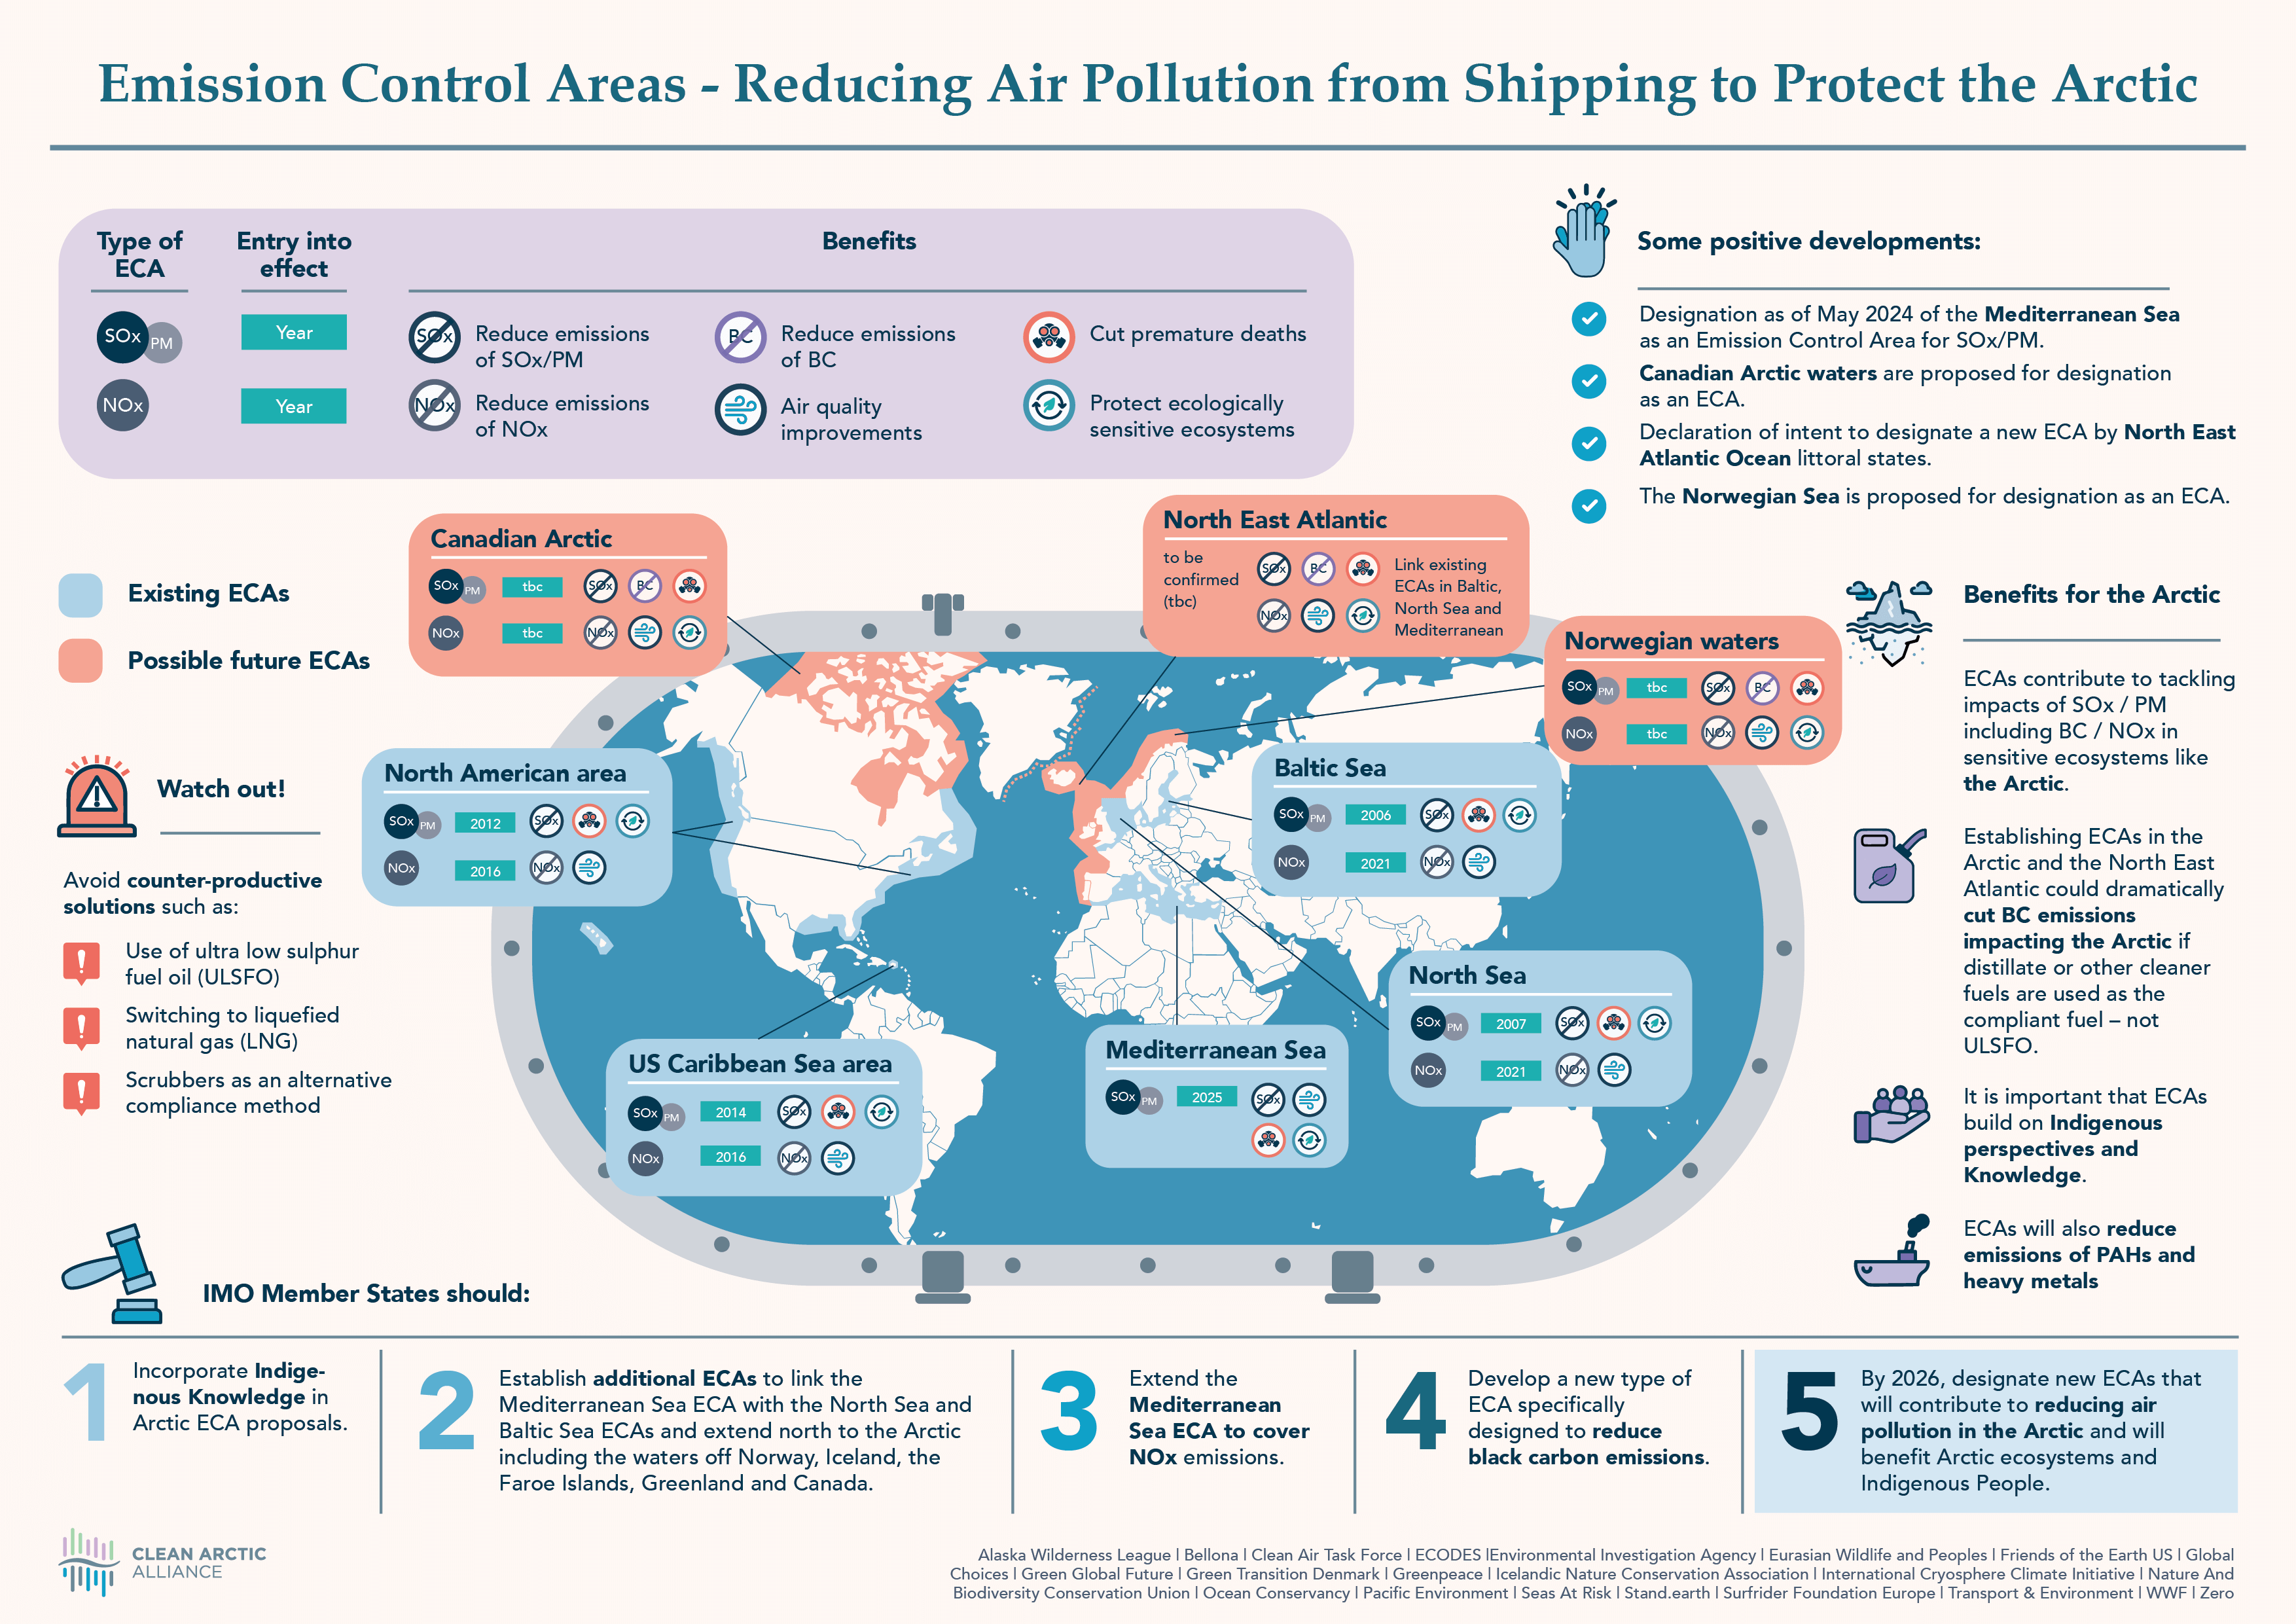 Infographic: Emission Control Areas - Reducing Air Pollution From Shipping